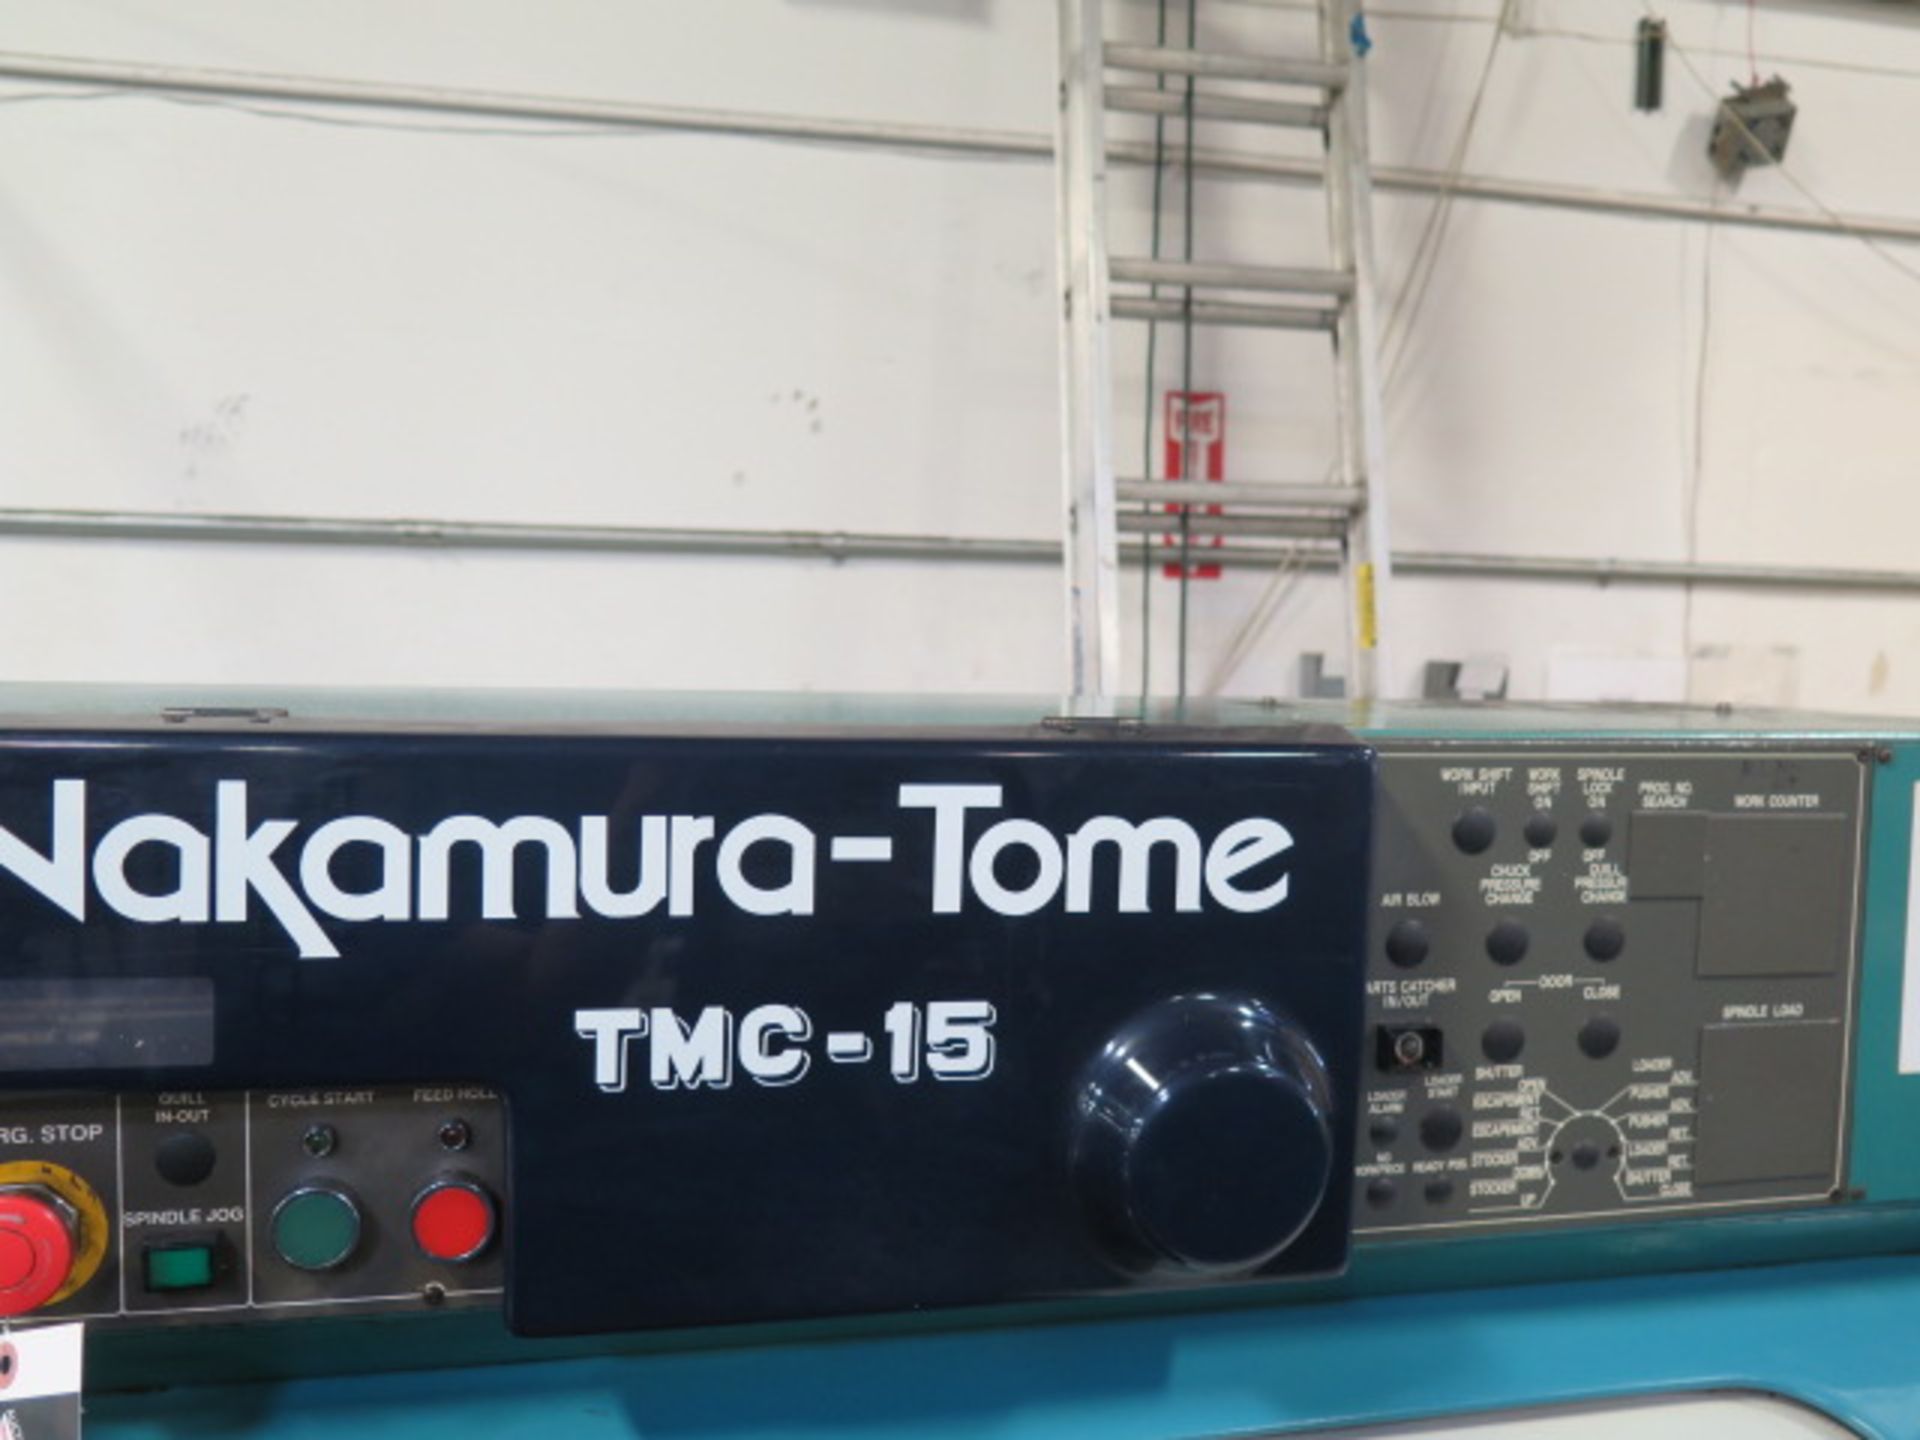 Nakamura Tome TMC-15 CNC Turning Center s/n E04101 w/ Fanuc Series 0-T Controls, SOLD AS IS - Image 10 of 13